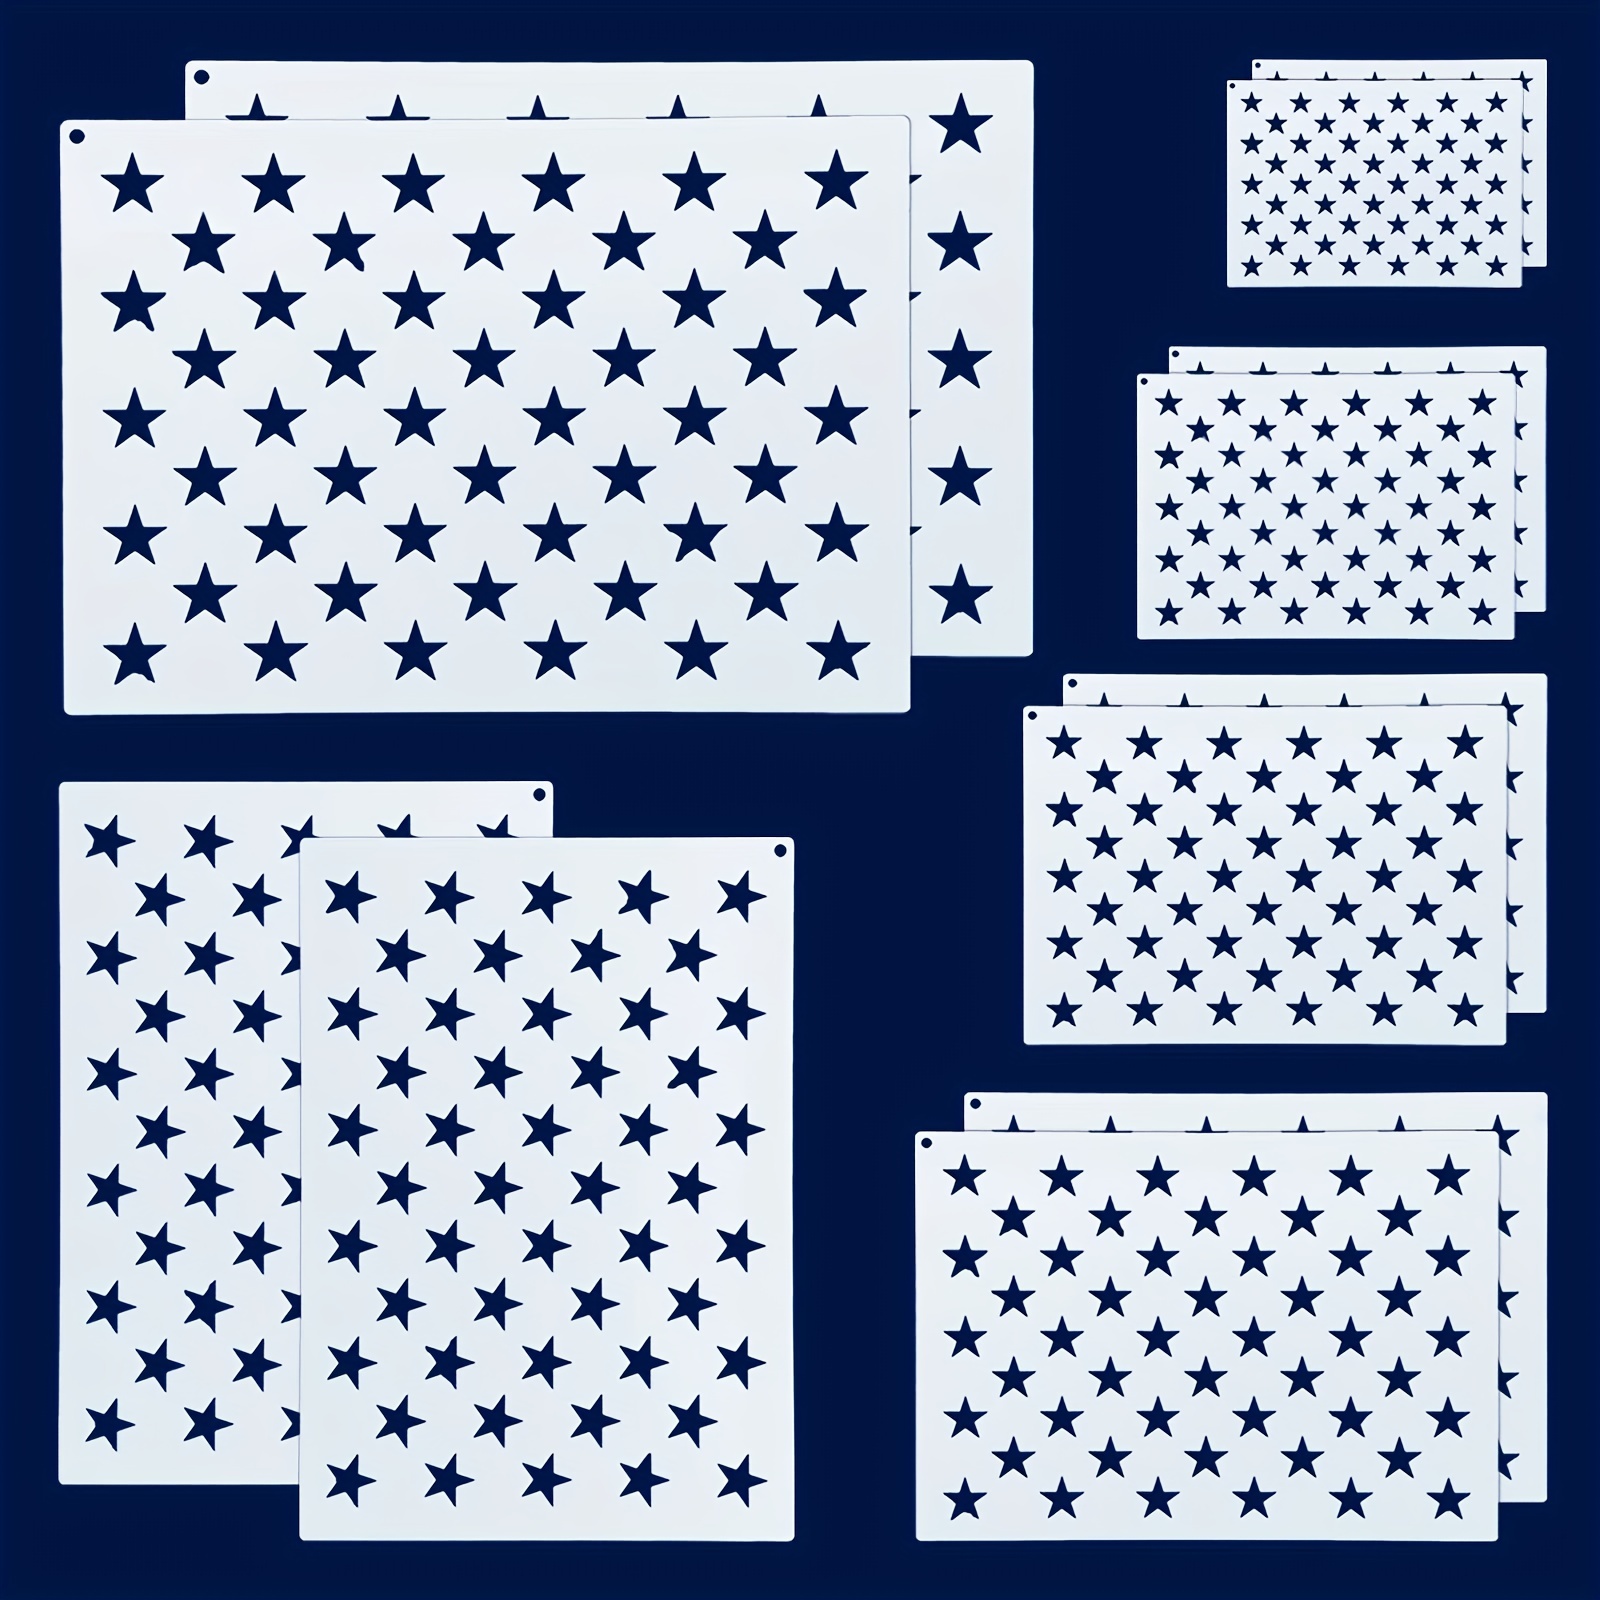 9 Pcs American Flag Stencils, We The People, Deer, 1776, Cow, Bear, Truck, Sunflower Stencils for Painting on Wood, Canvas, Walls, Fabric 